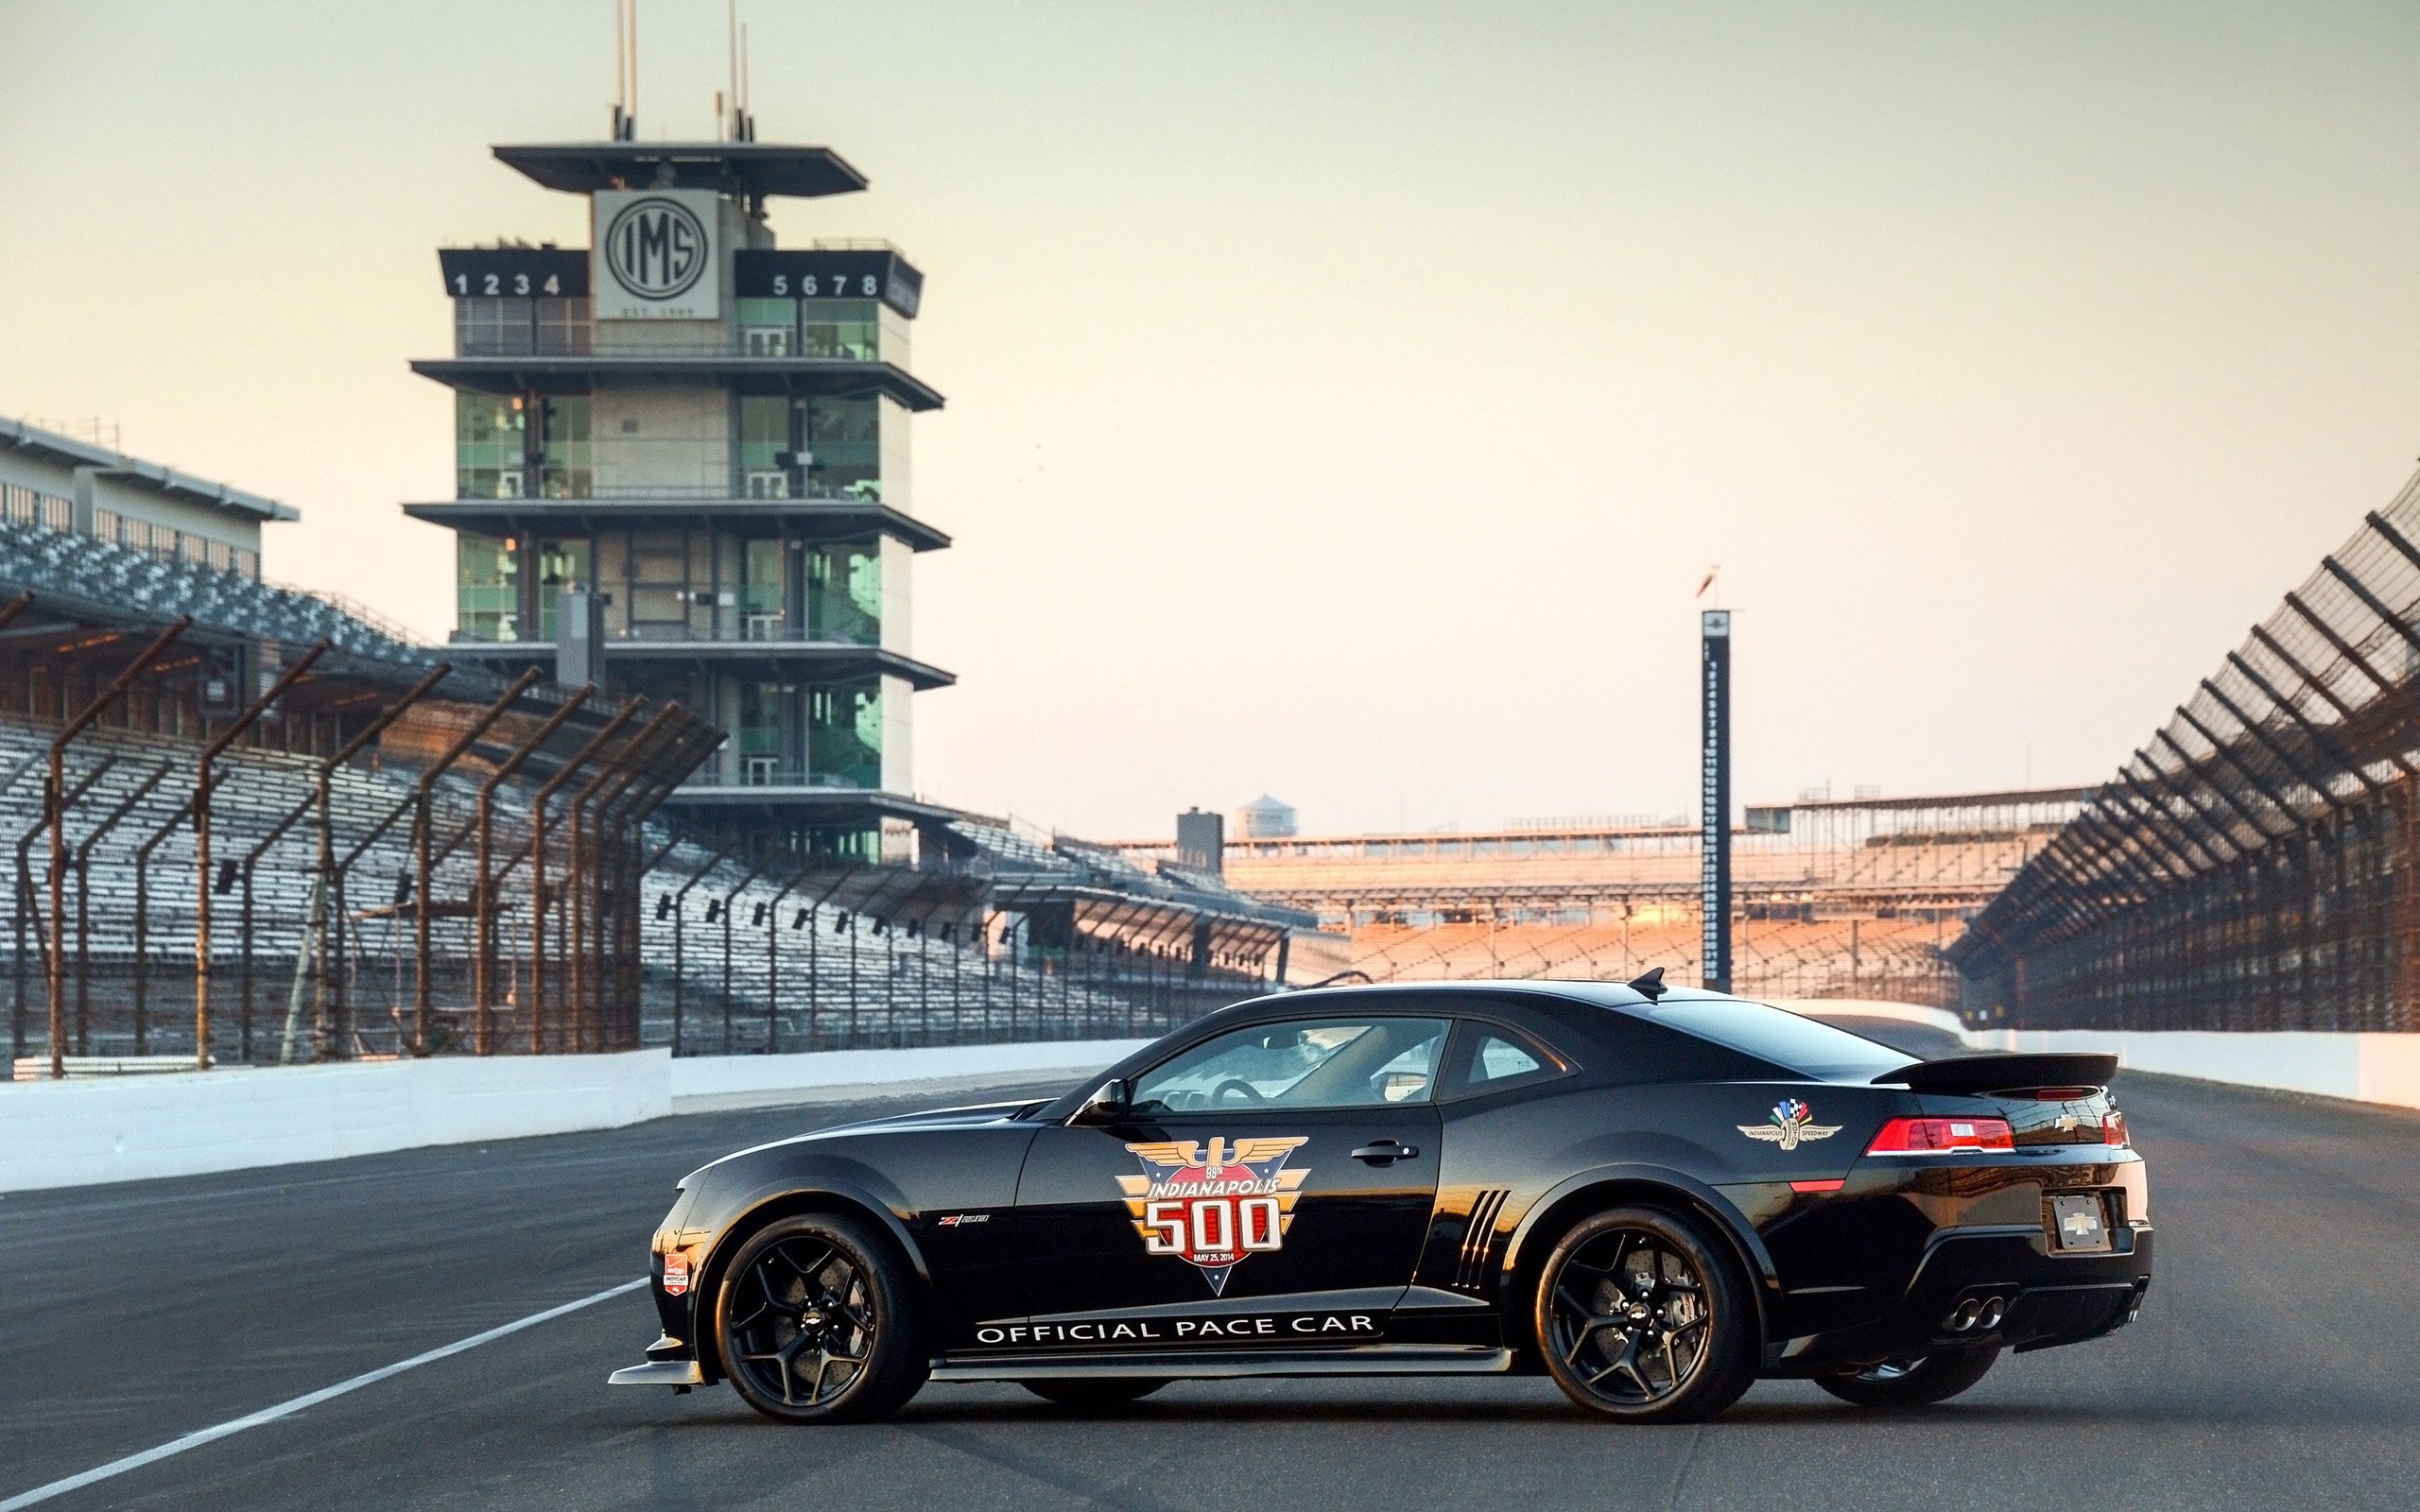 2014, Chevrolet, Camaro, Z28, Indy, 500, Pace, Race, Racing, Muscle, Rw Wallpaper